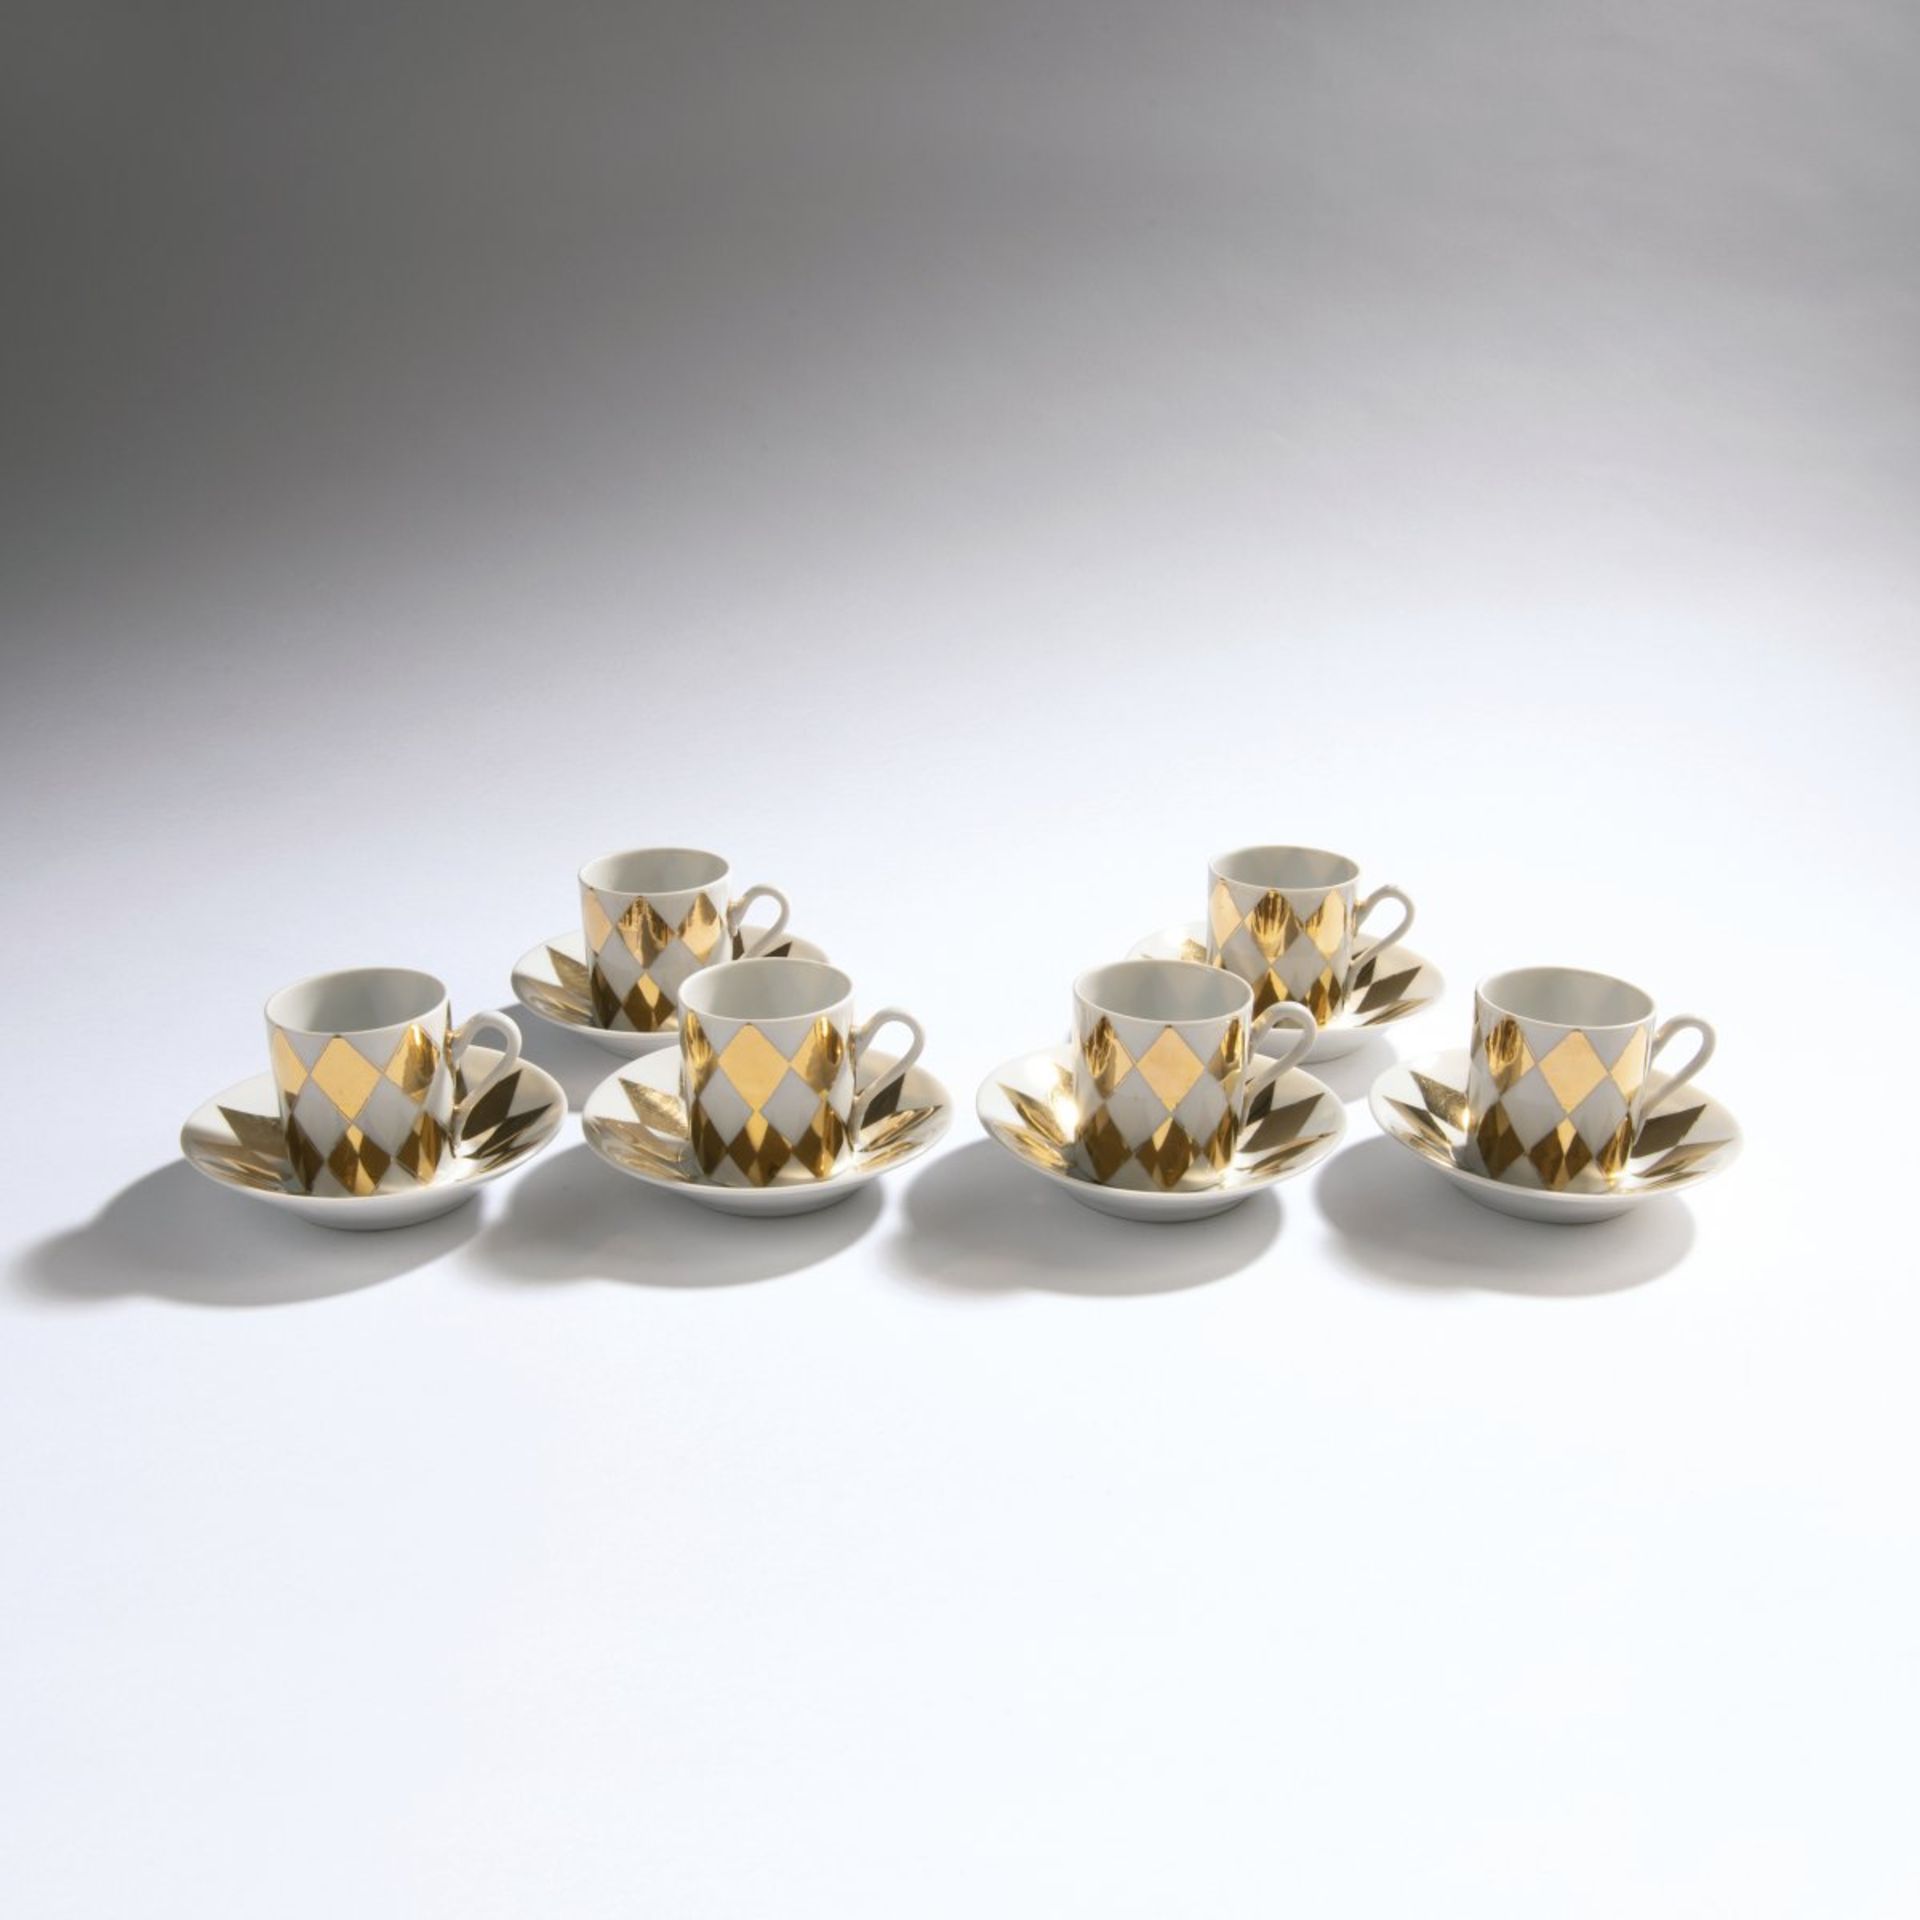 Piero Fornasetti, Six cups and saucers, 1960s